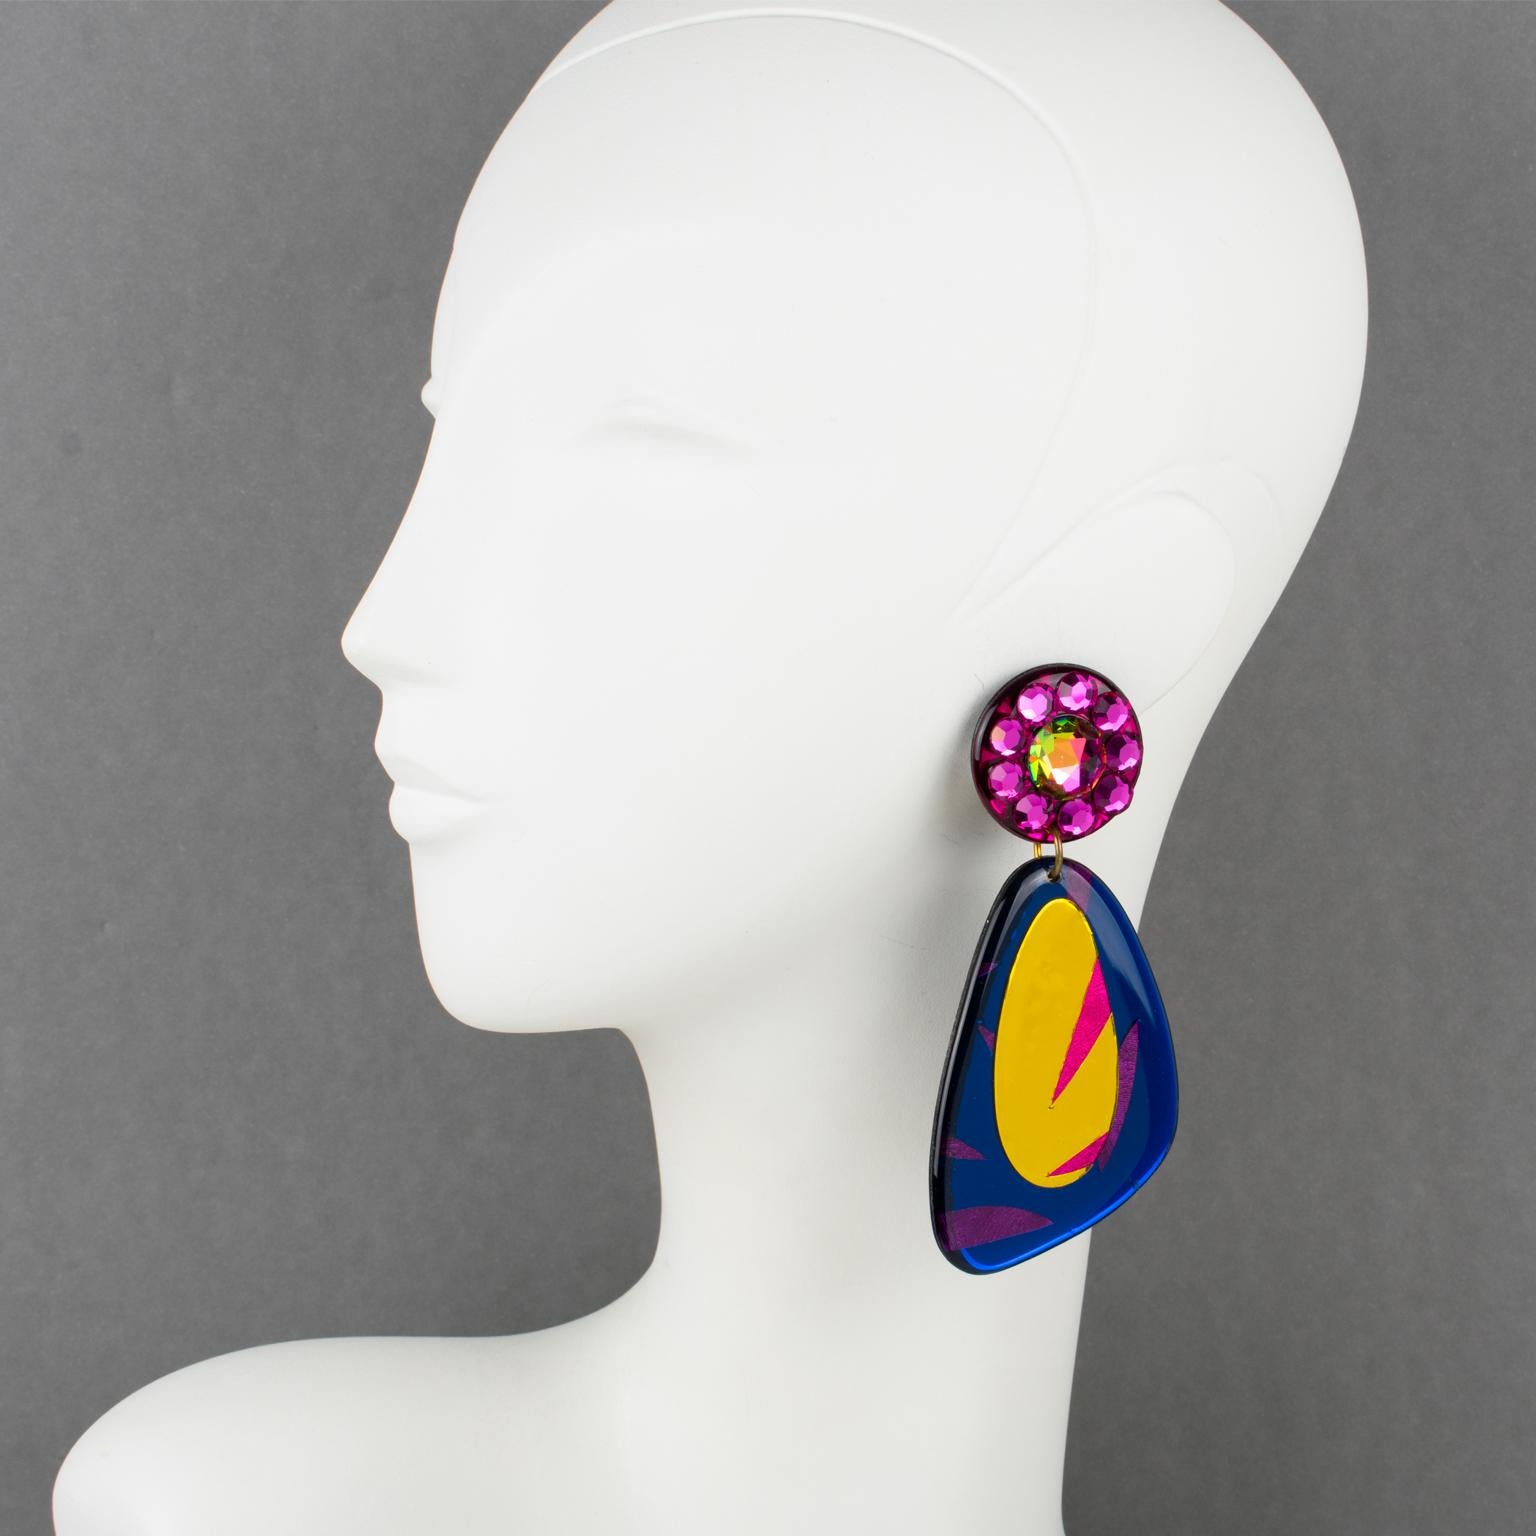 Stunning Italian designer studio Lucite dangling clip-on earrings. Chandelier shape with geometric design in navy blue, gold, and hot pink colors with mirror texture effect. Clip fittings are all paved with hot pink and hyacinth AB crystal